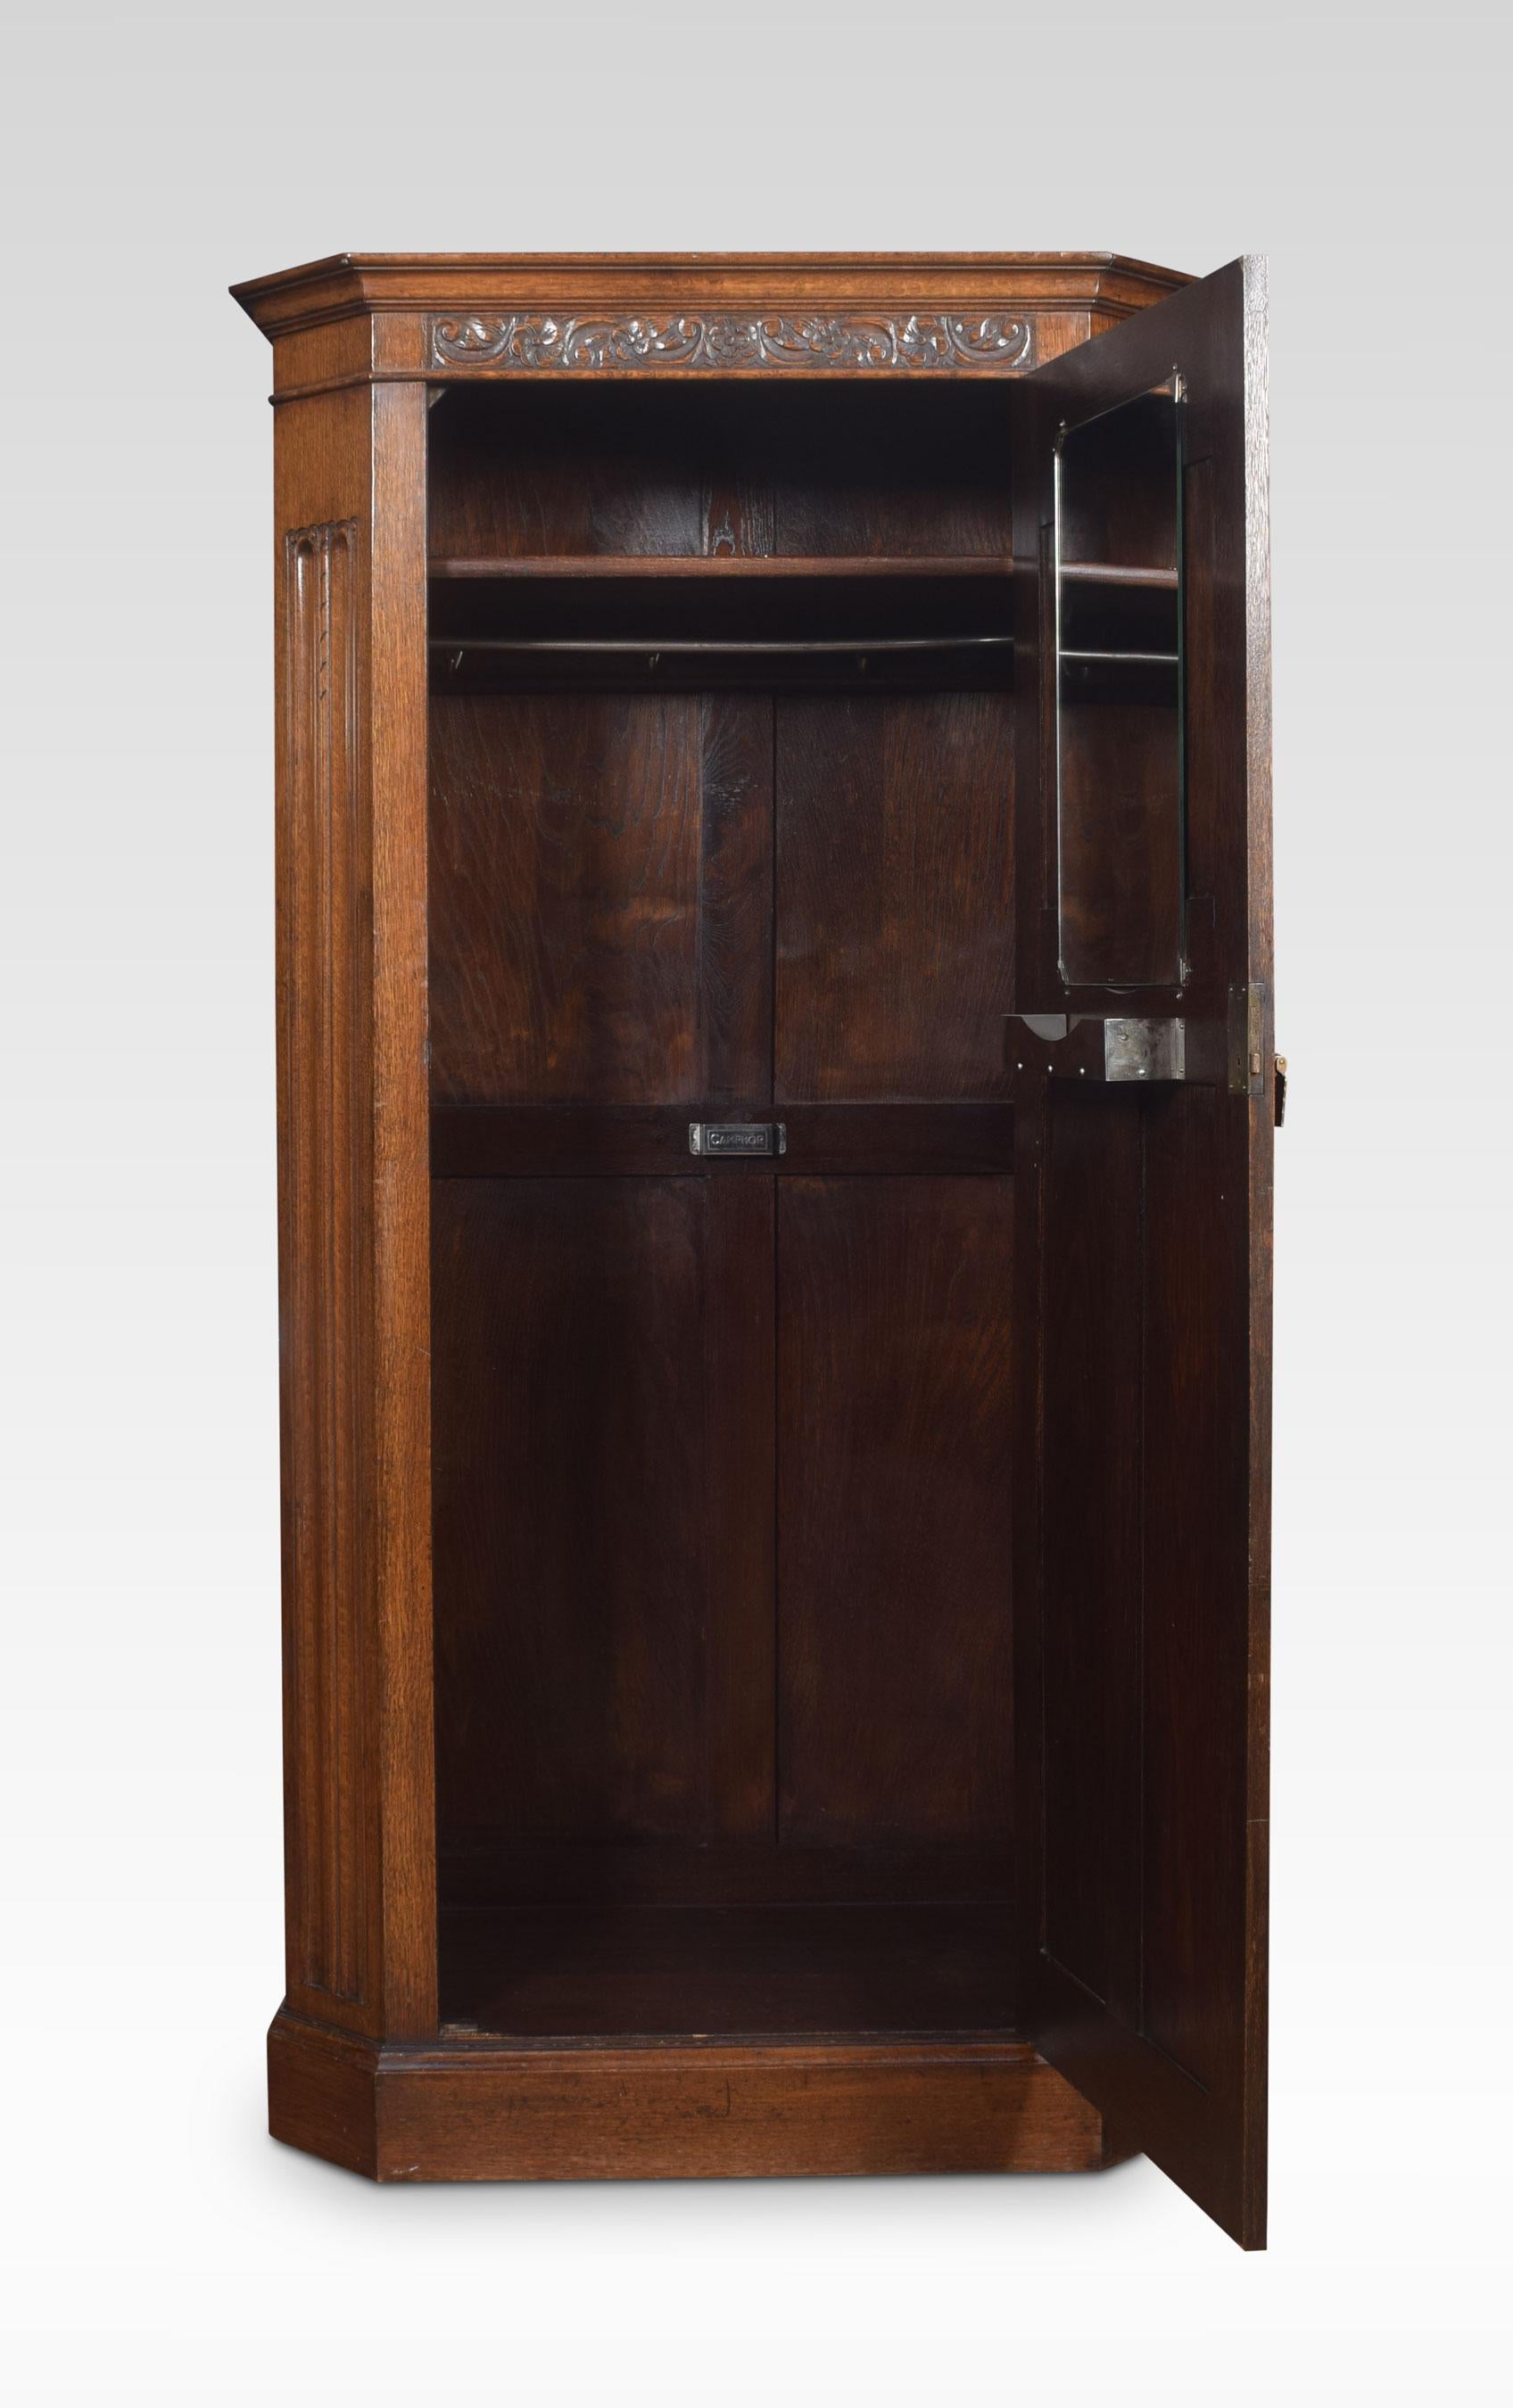 Oak hall robe, the molded cornice above large carved panel door with linenfold decoration. opening to reveal a hanging cupboard. Flanked by canned sides, all raised up on bun feet.
Dimensions:
Height 73 inches
Width 39.5 inches
Depth 20.5 inches.